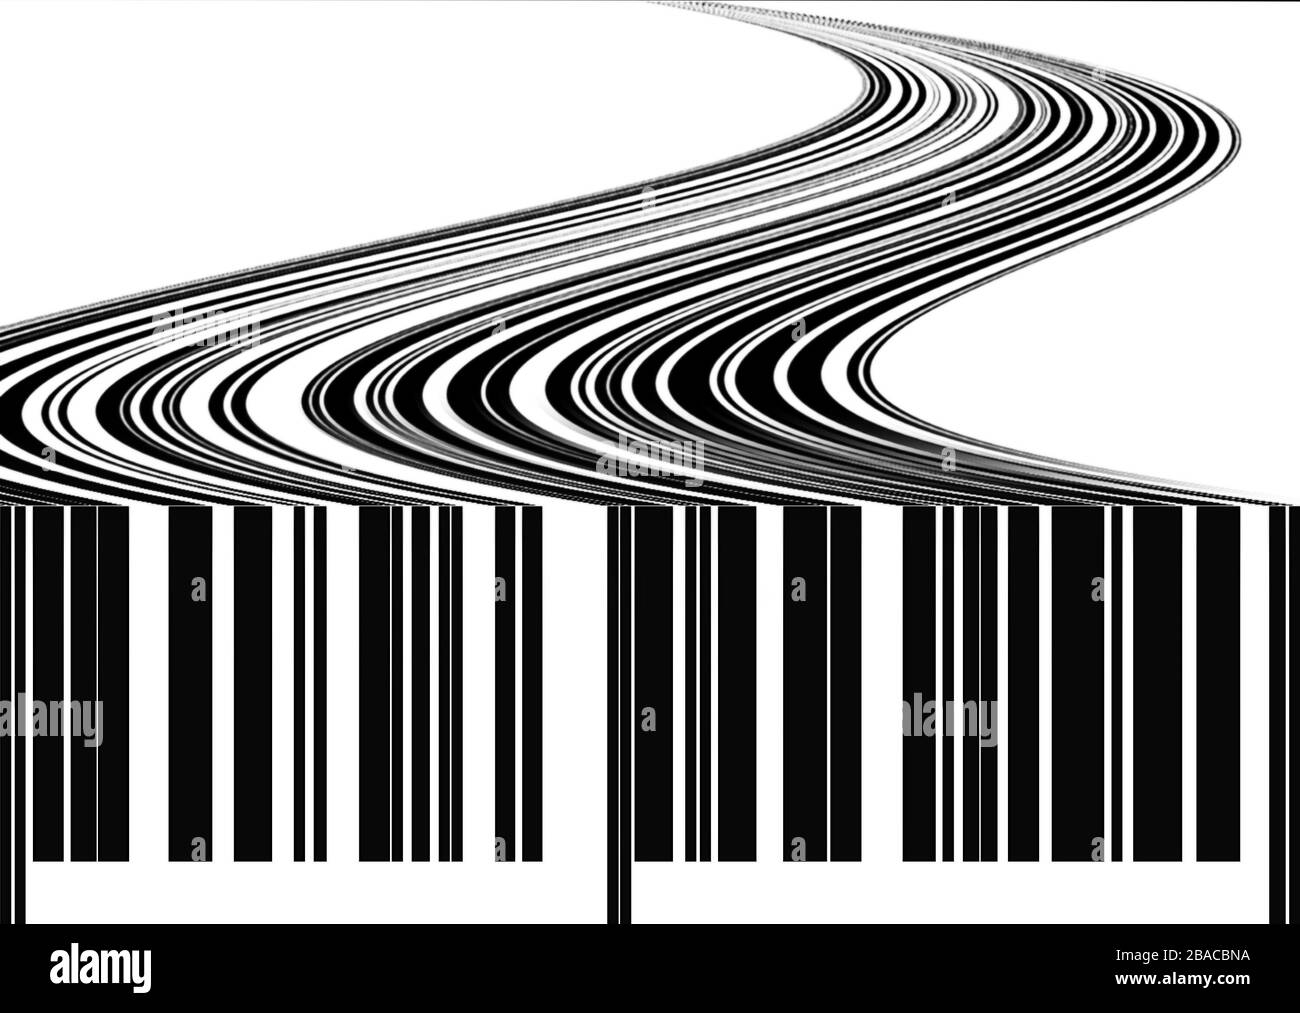 conceptual road fron the barcode Stock Photo